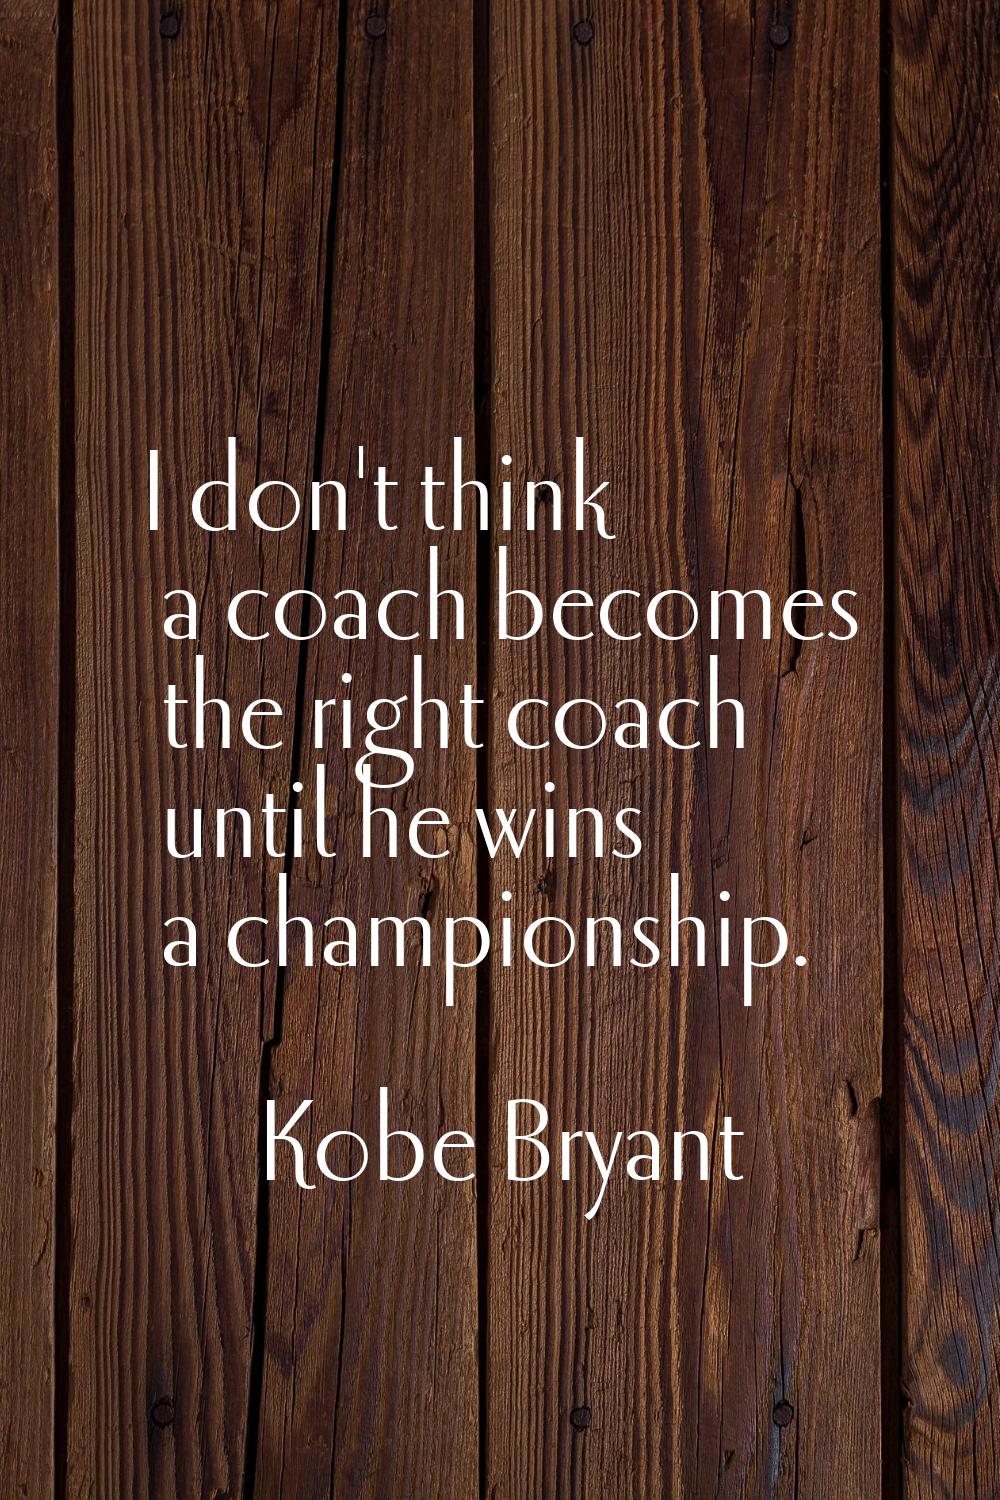 I don't think a coach becomes the right coach until he wins a championship.